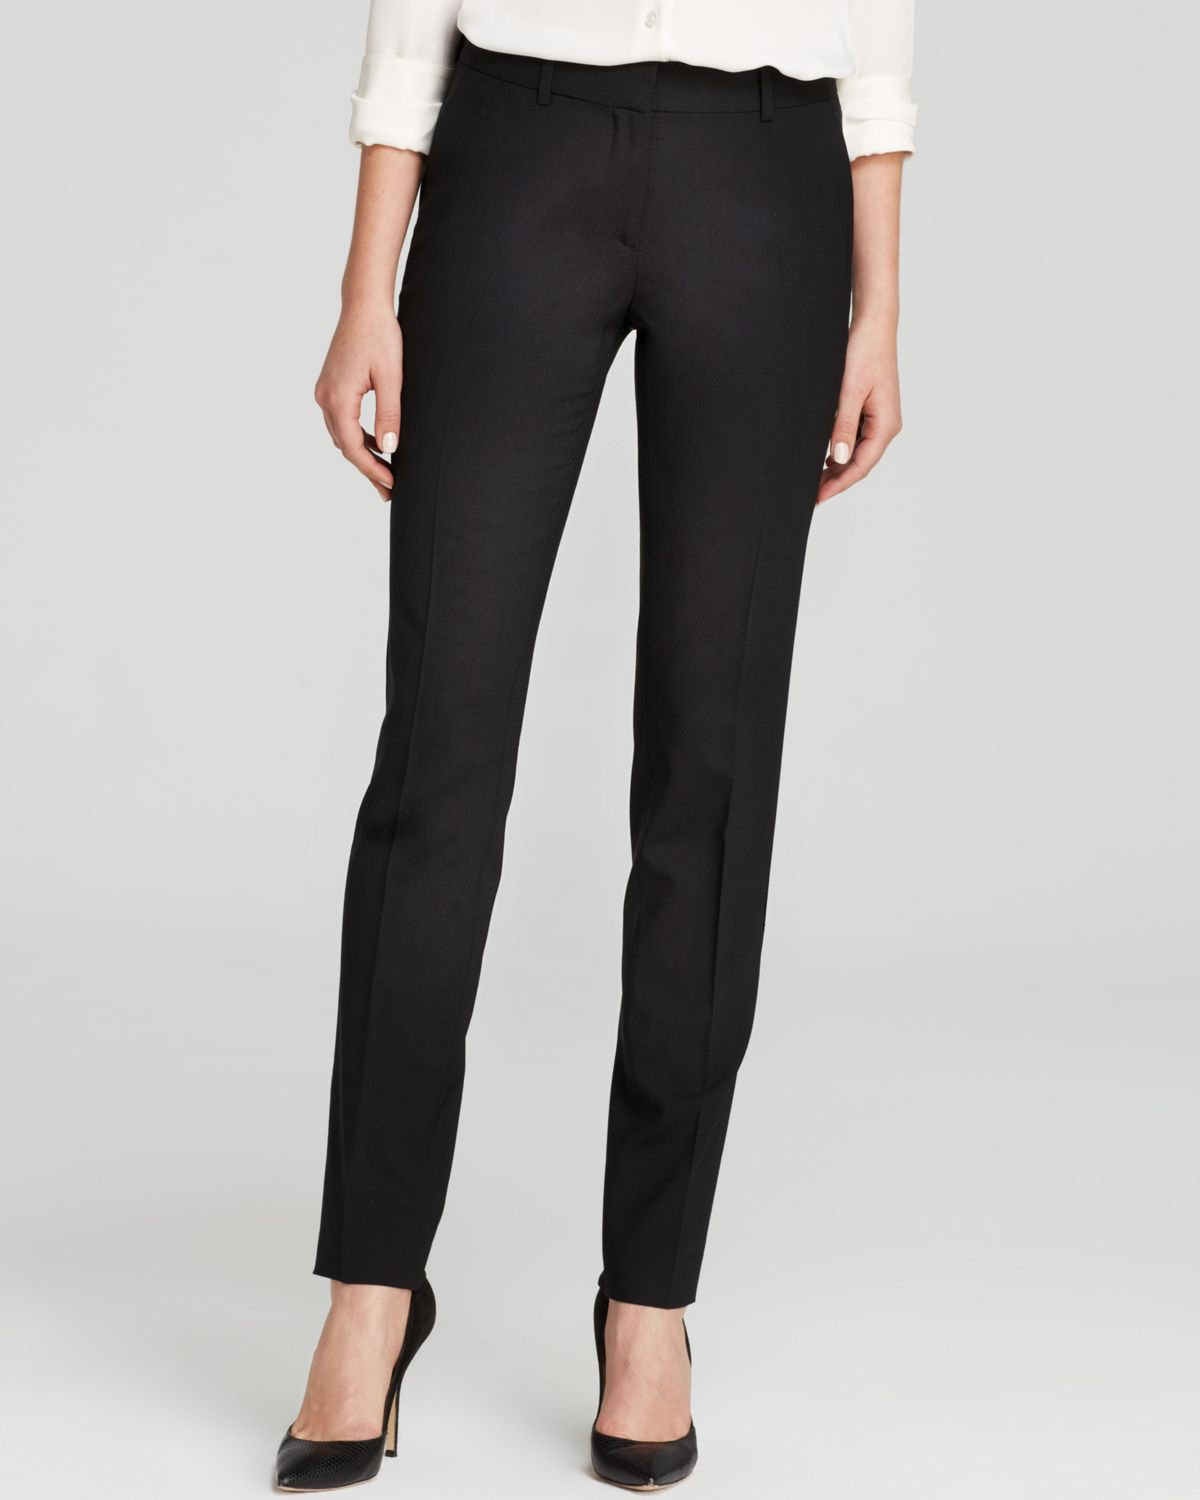 Theory Pants - Super Slim Edition in Black | Lyst